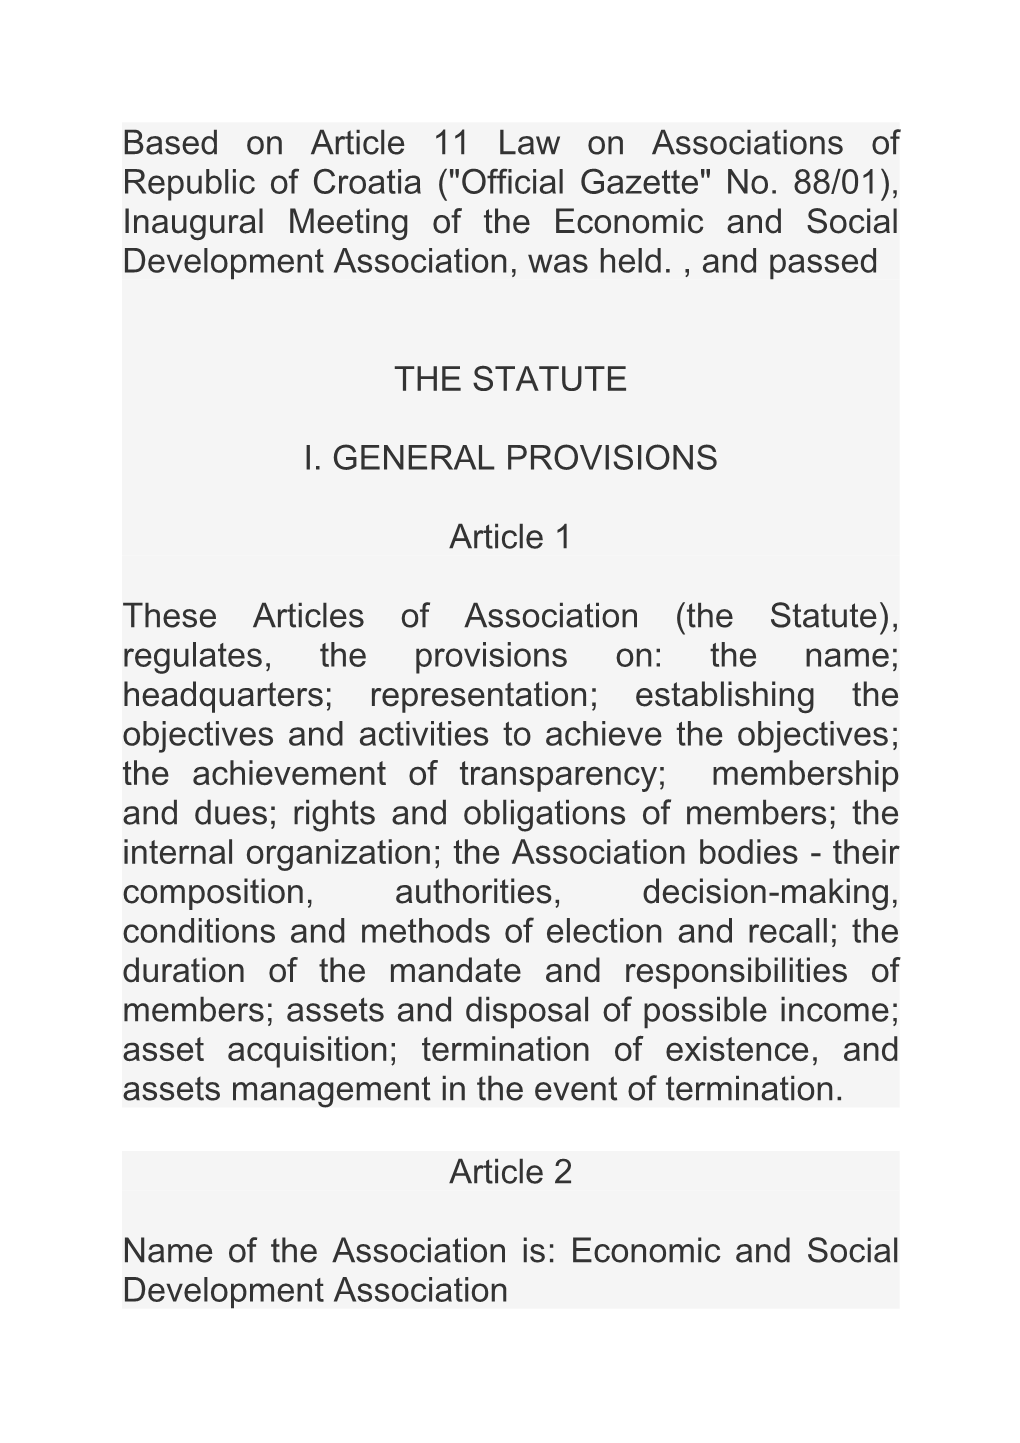 THE STATUTE I. GENERALPROVISIONS Article 1